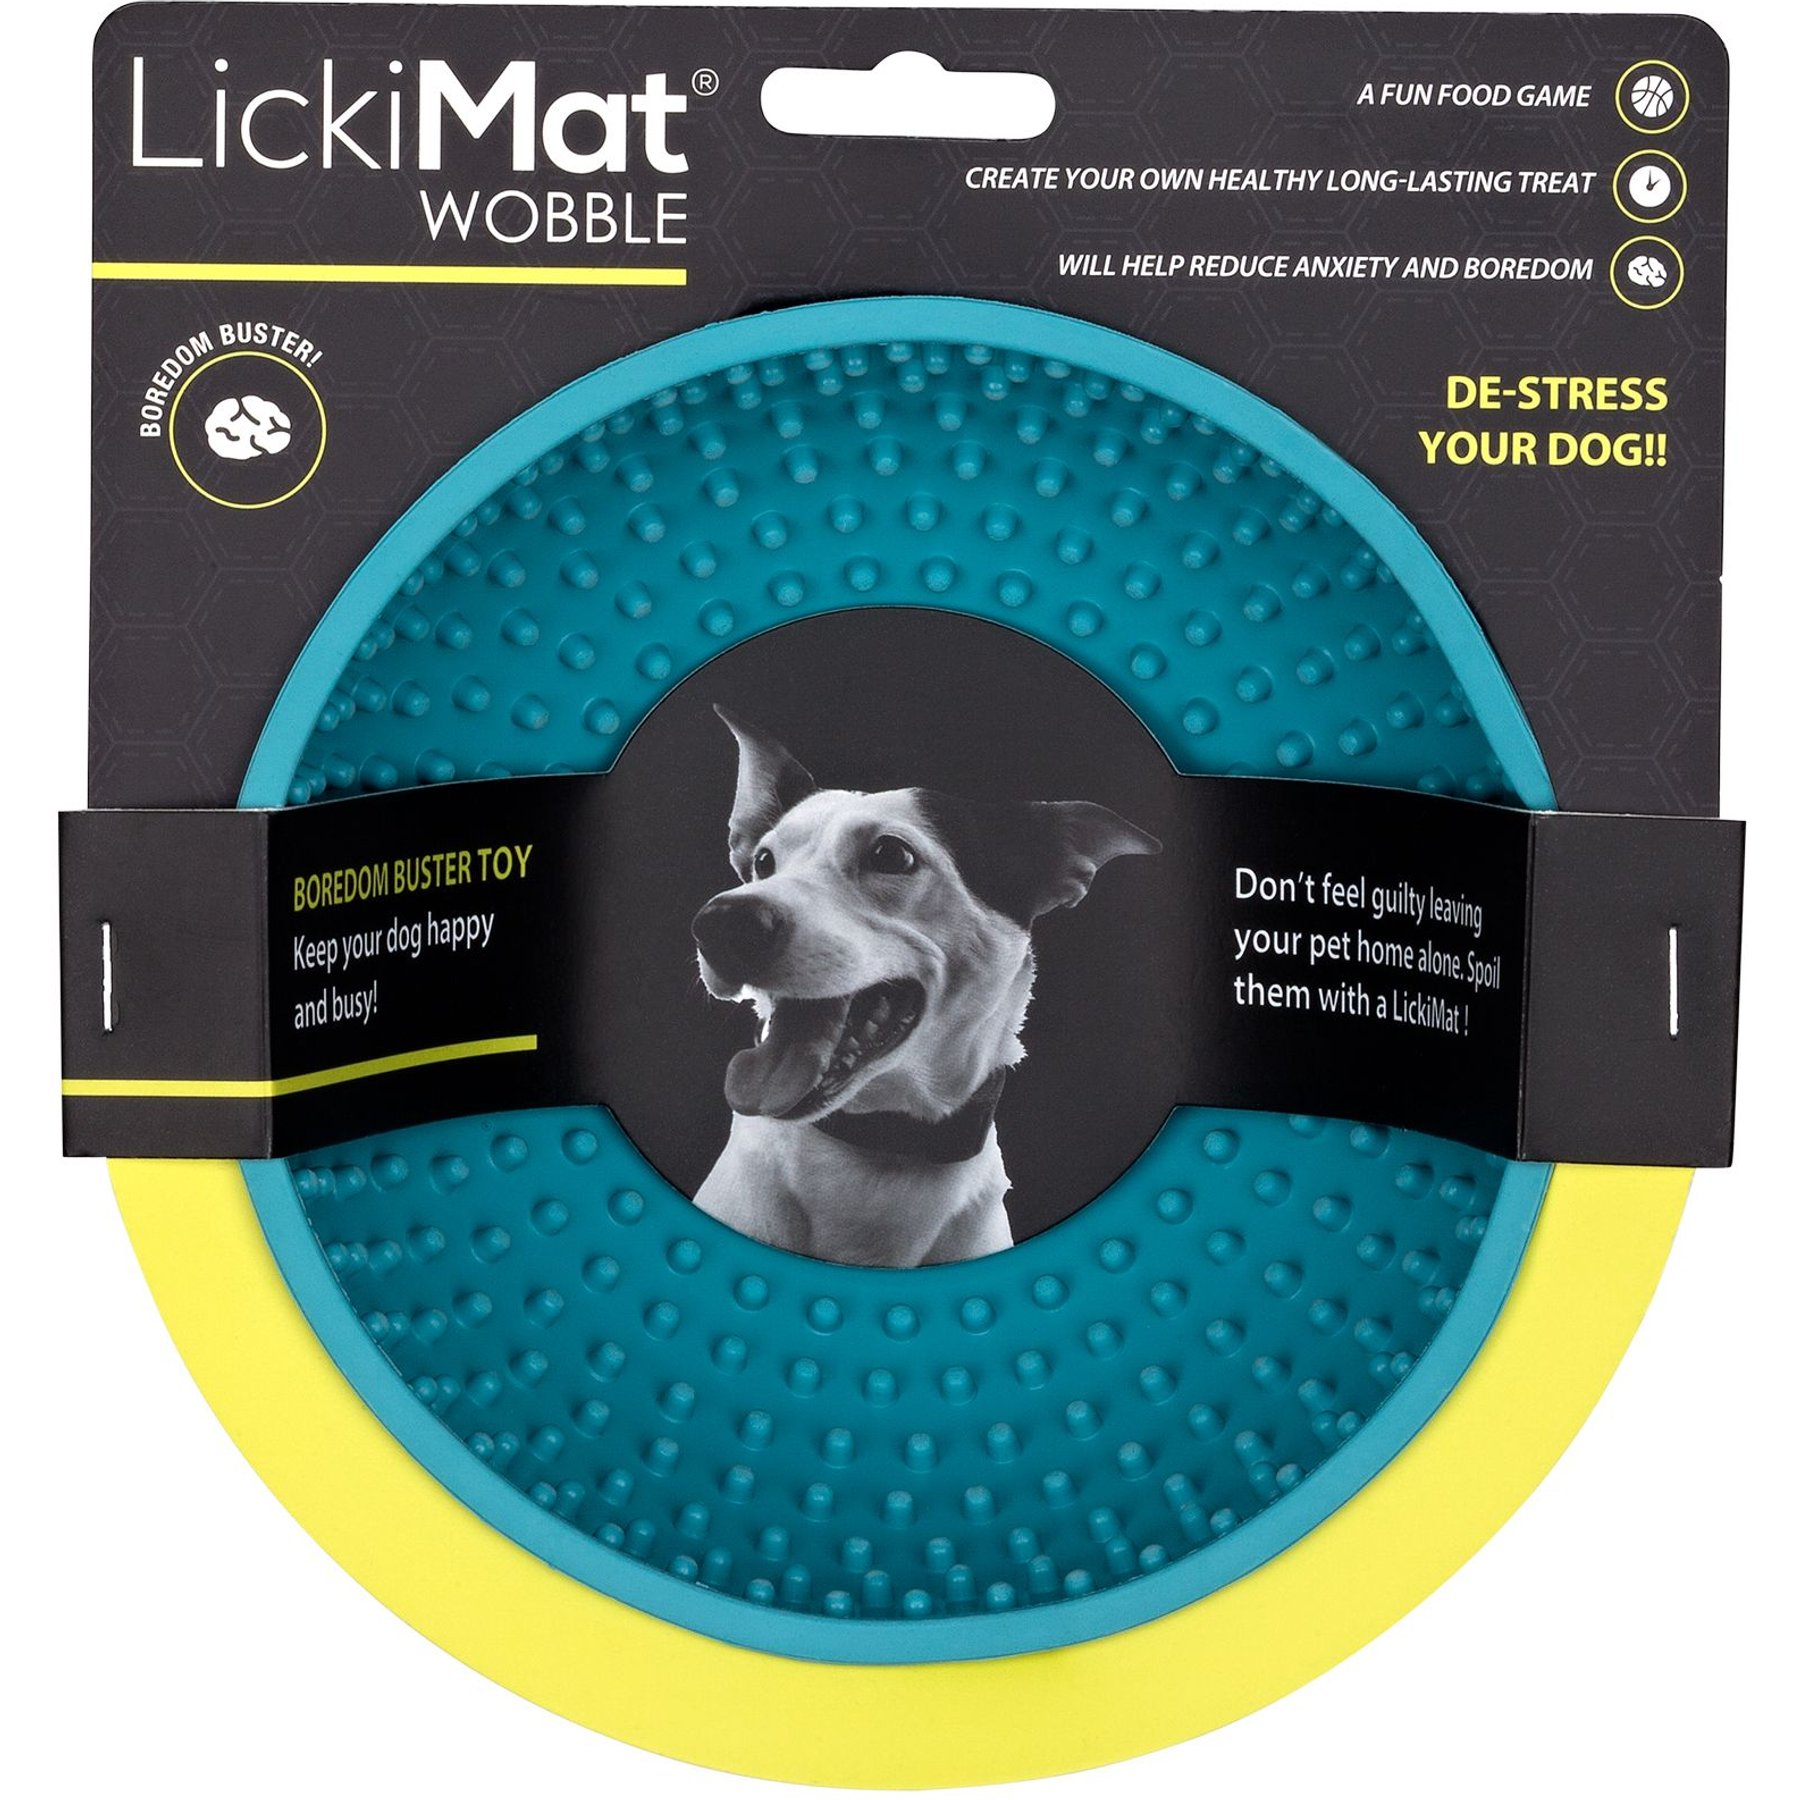  Hyper Pet IQ Treat Lick Mat for Dogs, Dog Slow Feeder & Cat  Lick Mats, Great Alternative to Slow Feeder Dog Bowls & Cat Slow Feeders